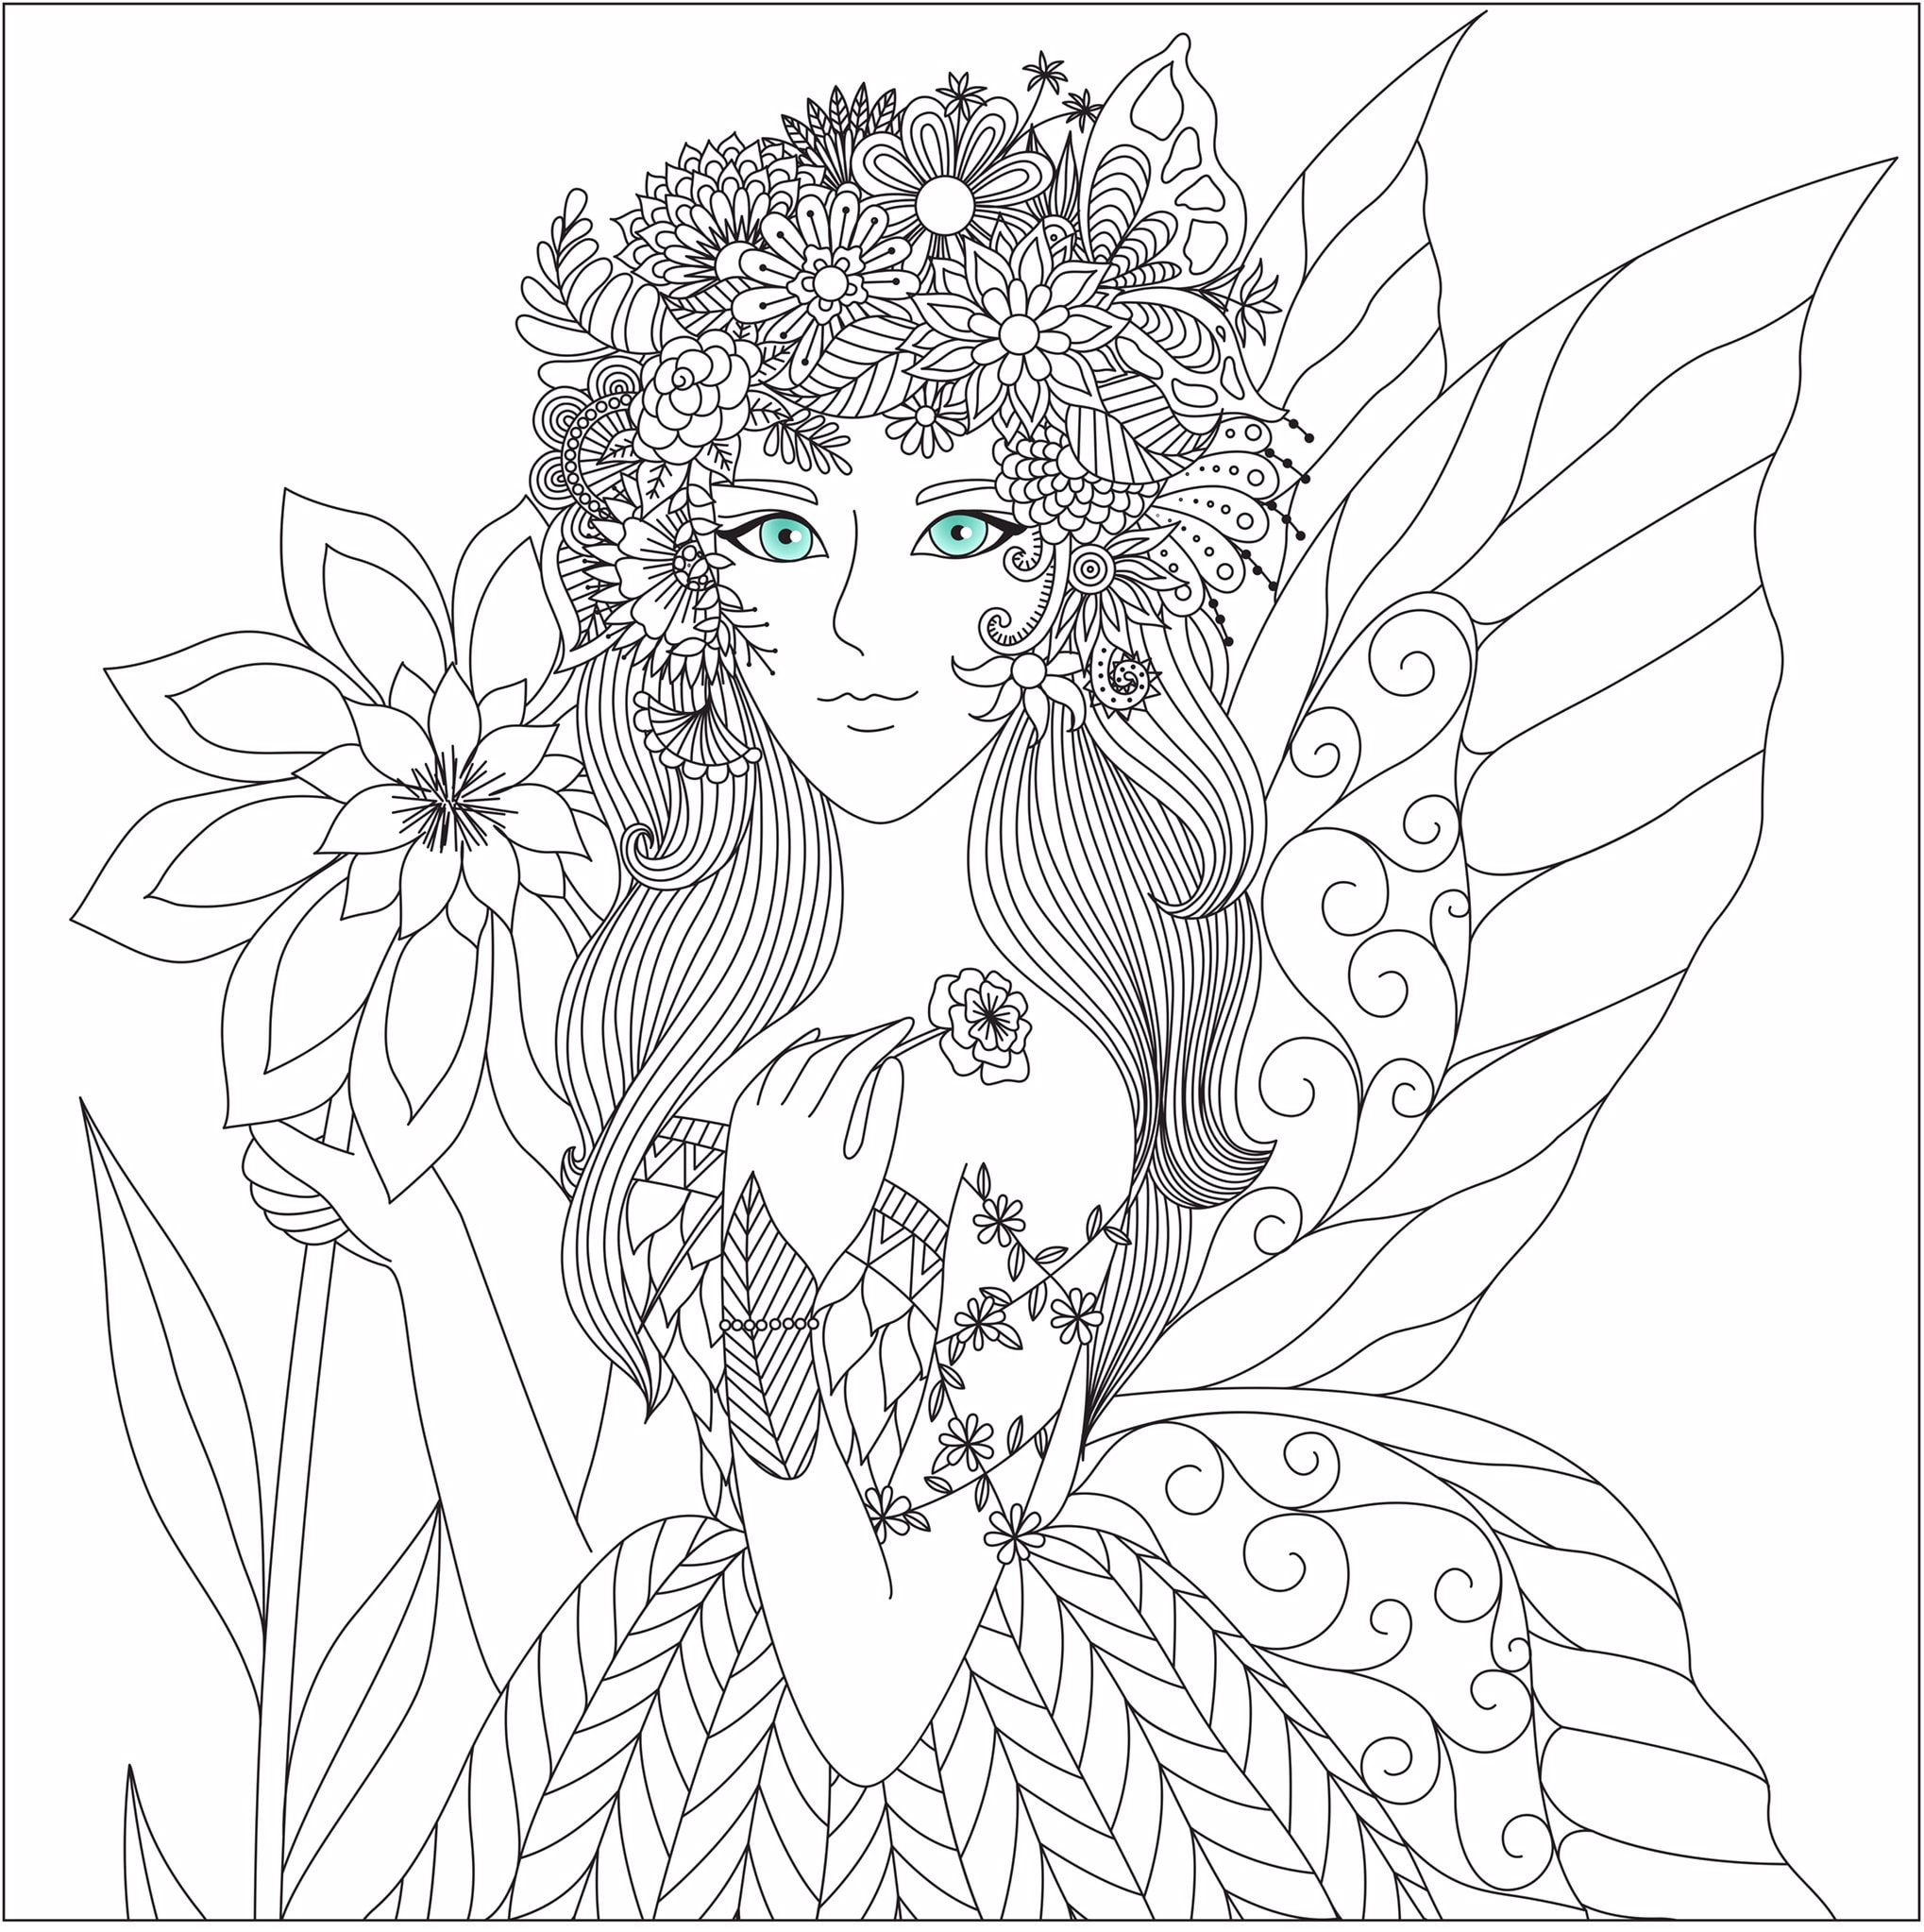 Fairy coloring page fairy tale coloring sheet printable adult coloring book page kids coloring book sheet download now